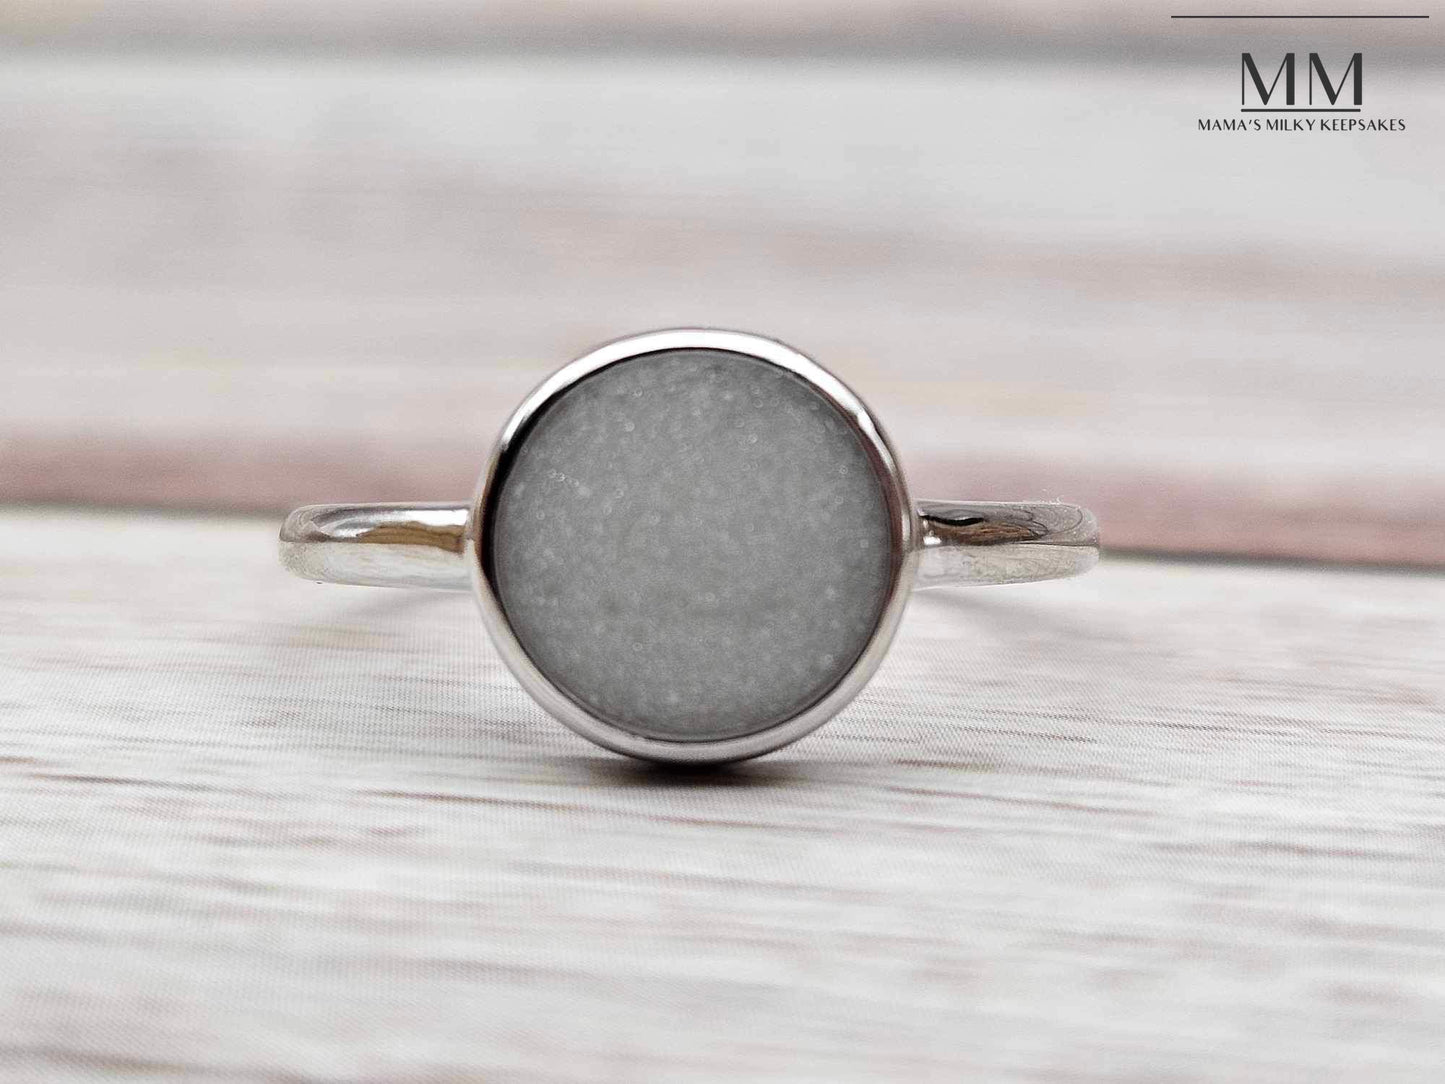 Breastmilk Round Ring, Cremation Round Ring, Keepsake Round Ring, Sterling Silver Round Ring, Hair Ring, Ash Ring, Umbilical Cord Ring, BreastmilkJewelry Round Ring, DIY Round Ring